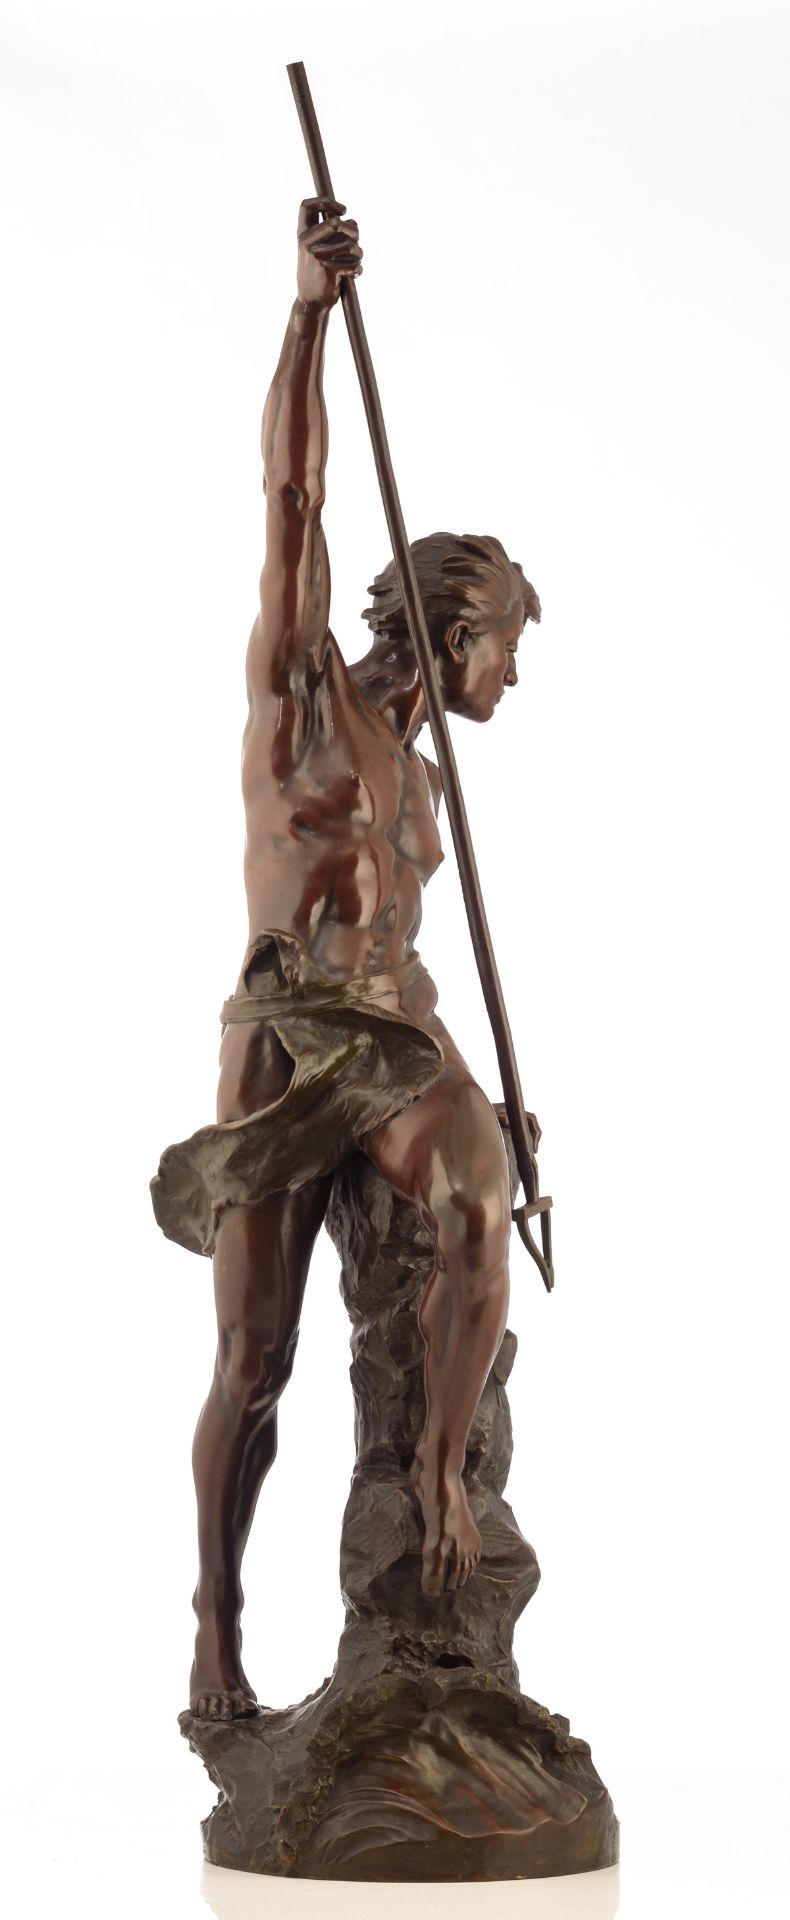 Ferrand E.J., a fisherman with his harpoon, patinated bronze, H 116 cm - Image 4 of 6